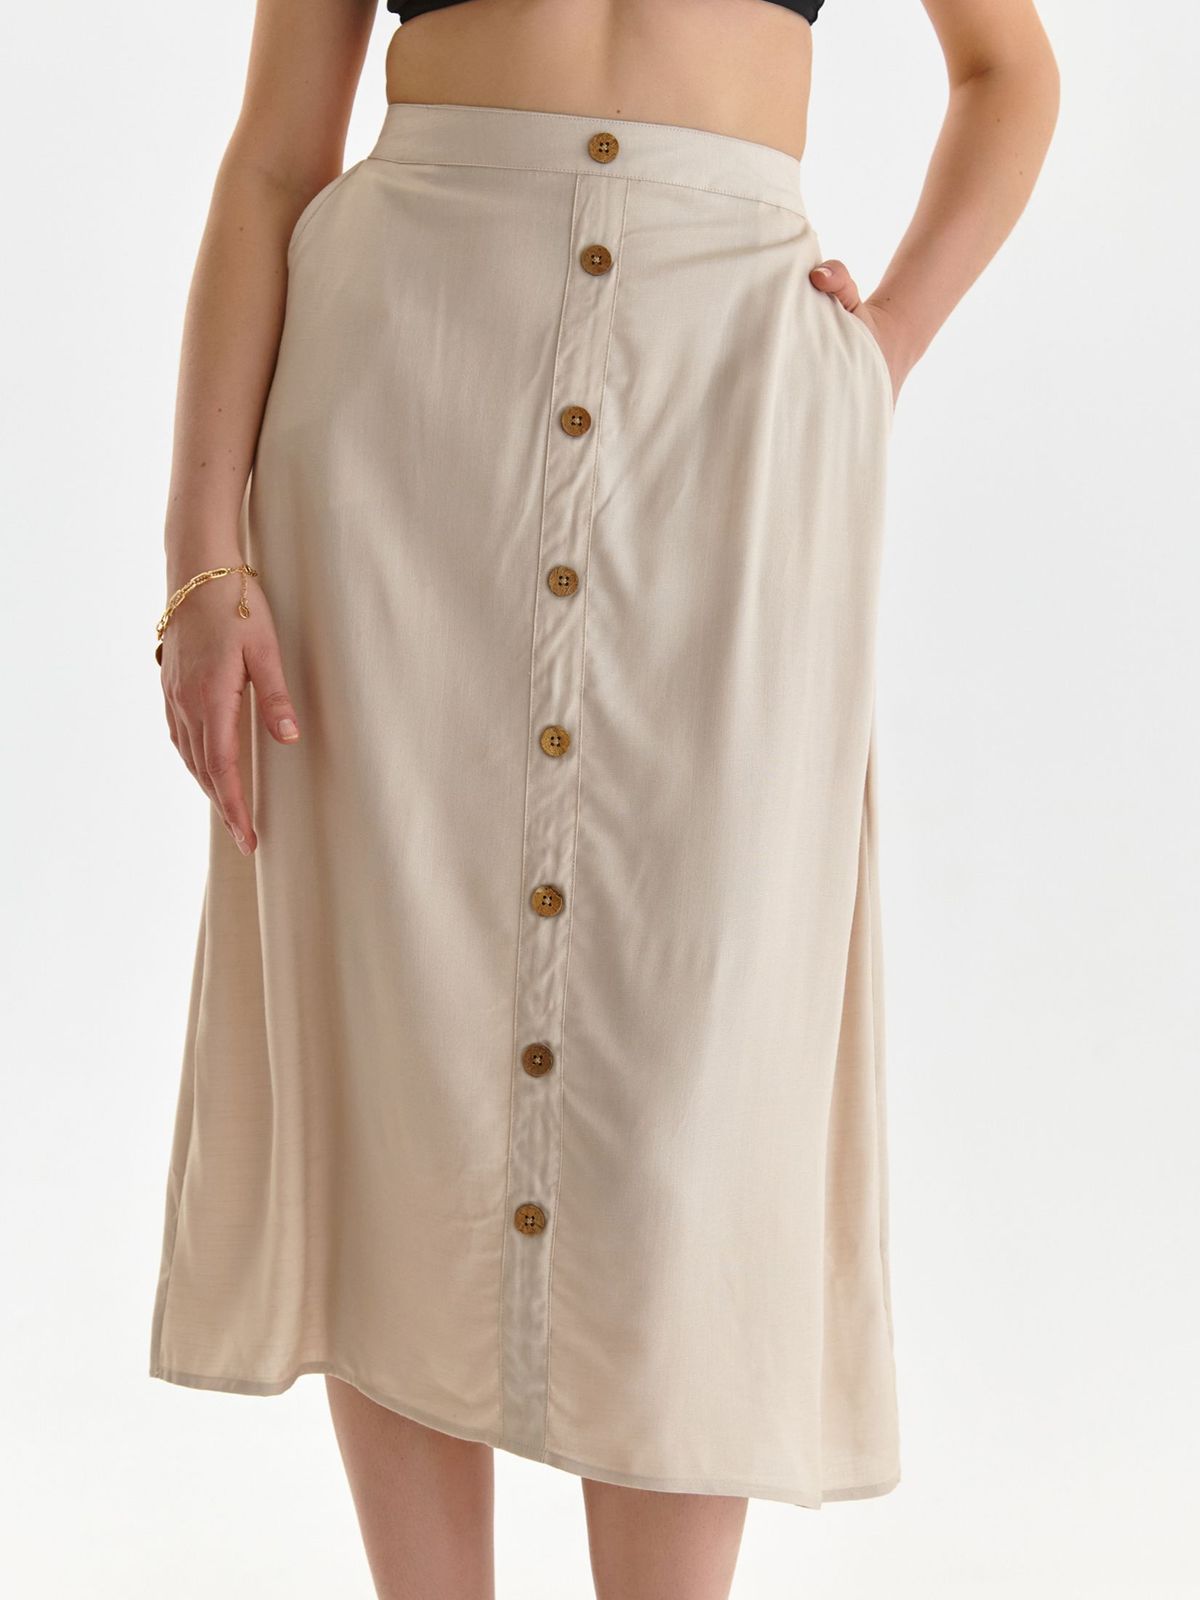 Beige skirt thin fabric cloche lateral pockets with decorative buttons 4 - StarShinerS.com